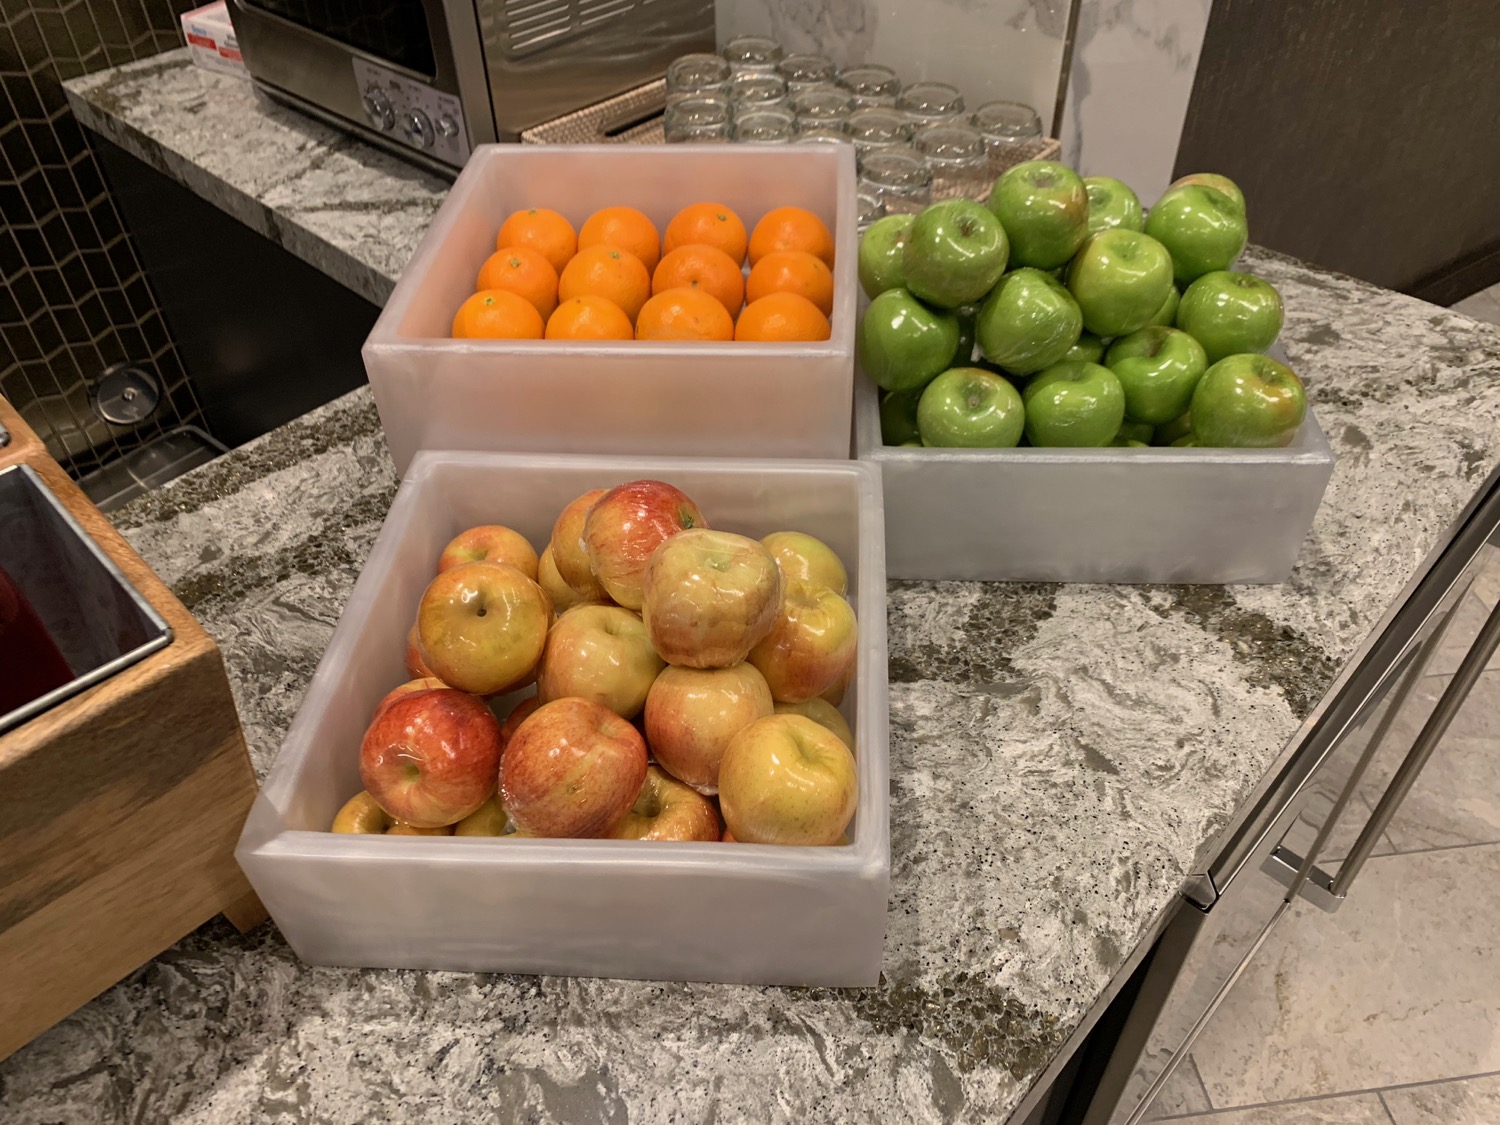 a group of containers of apples and oranges on a counter